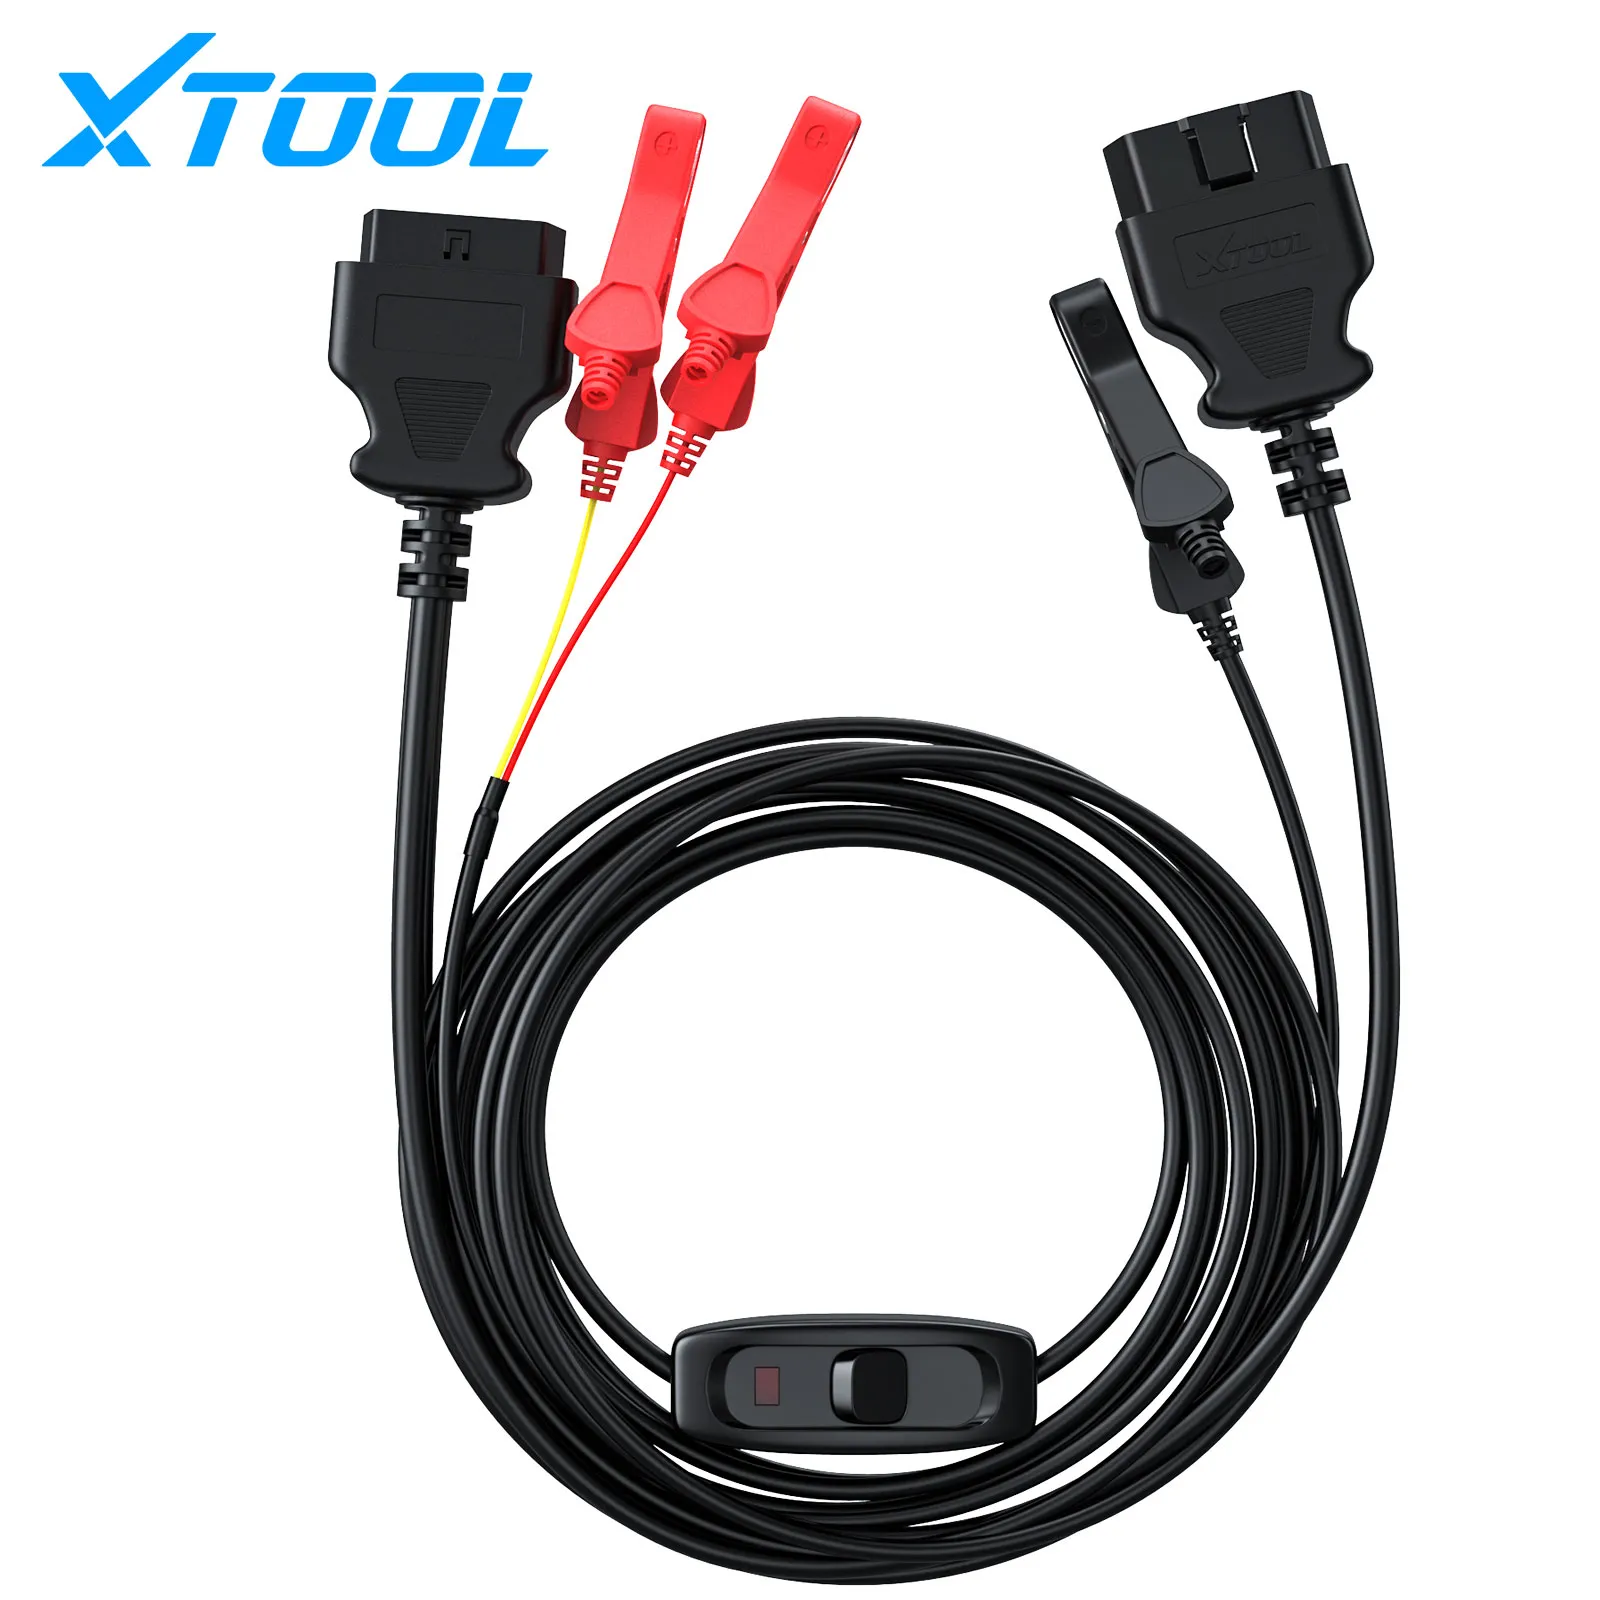 XTOOL AKL Alarm Bypass Cable For Ford/For LINCOLN All Key Lost Key Programmer Adapter